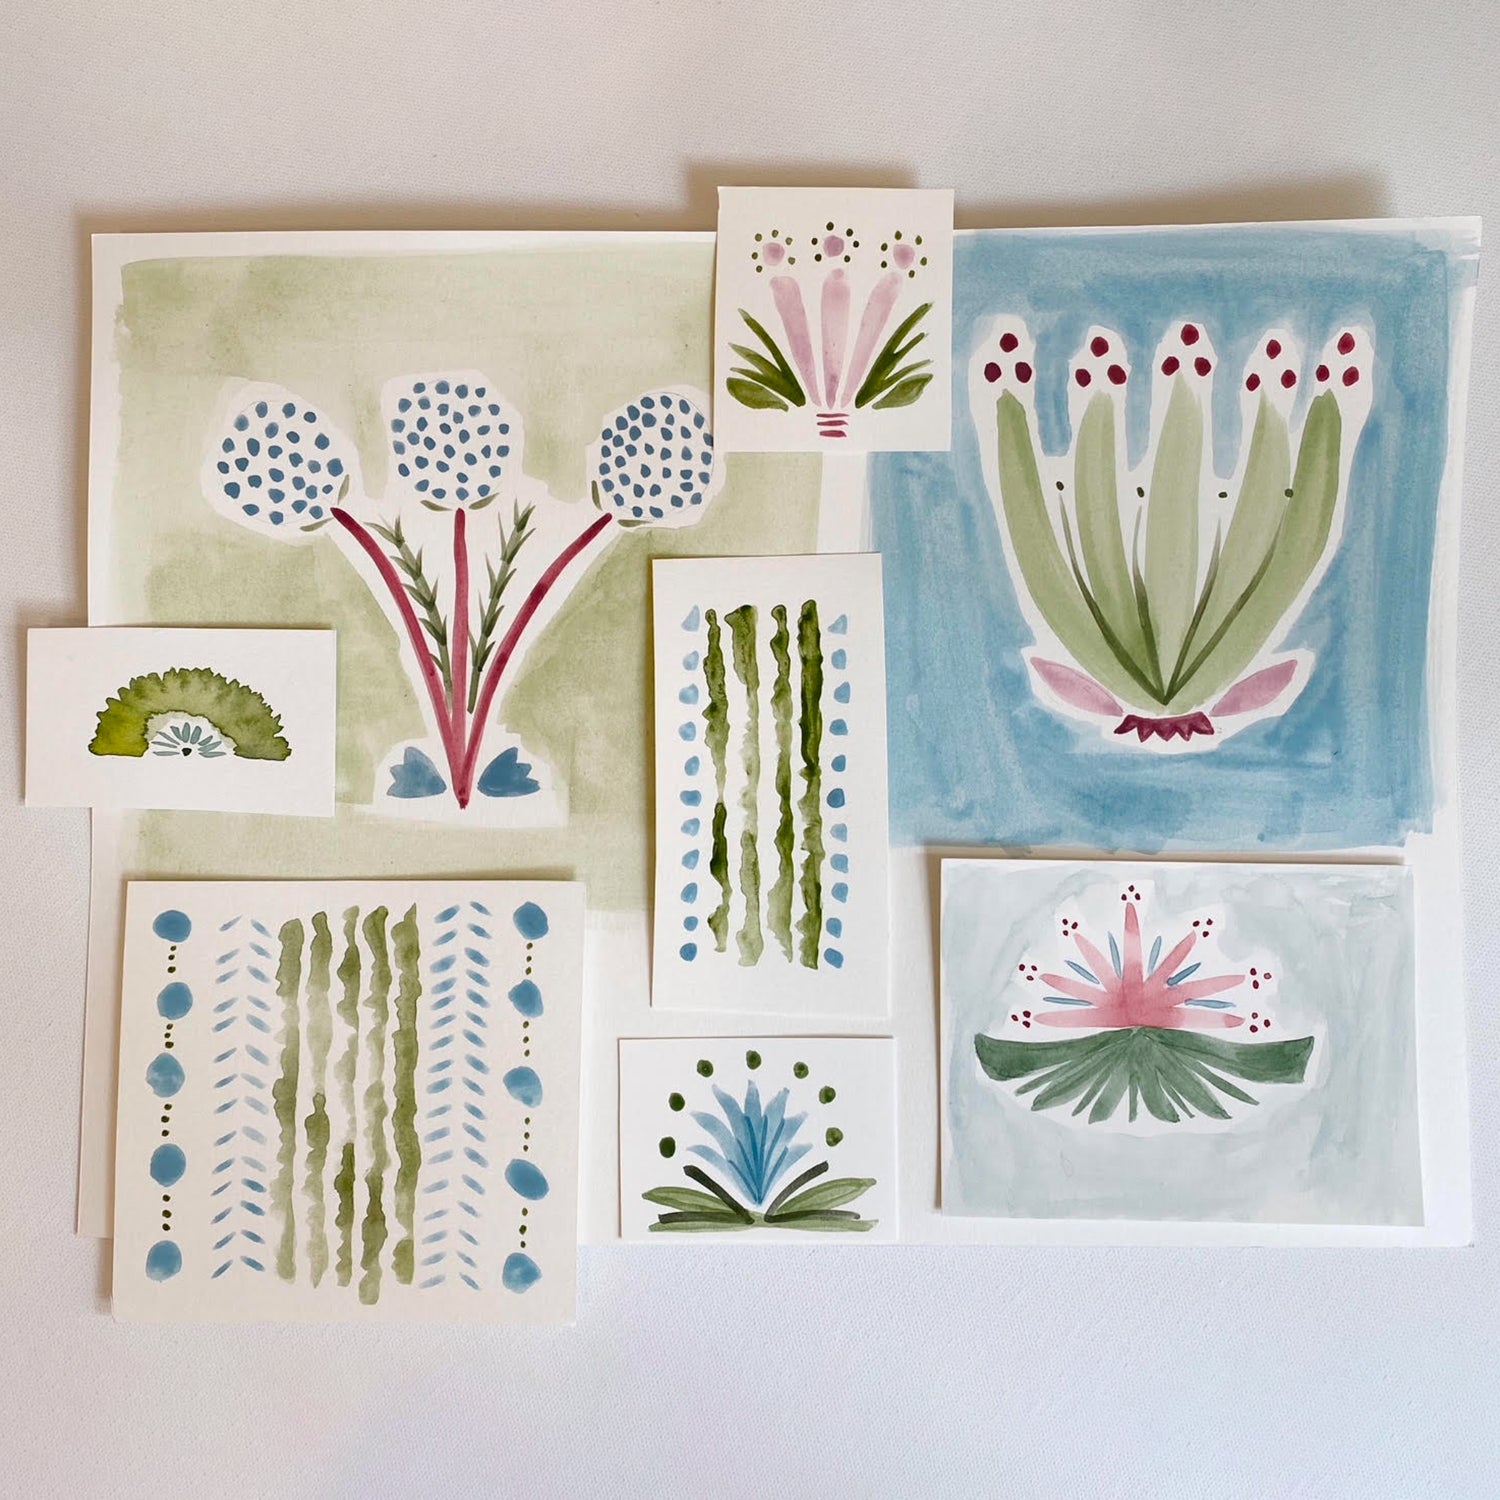 Hand-painted Floral Designs on Paper